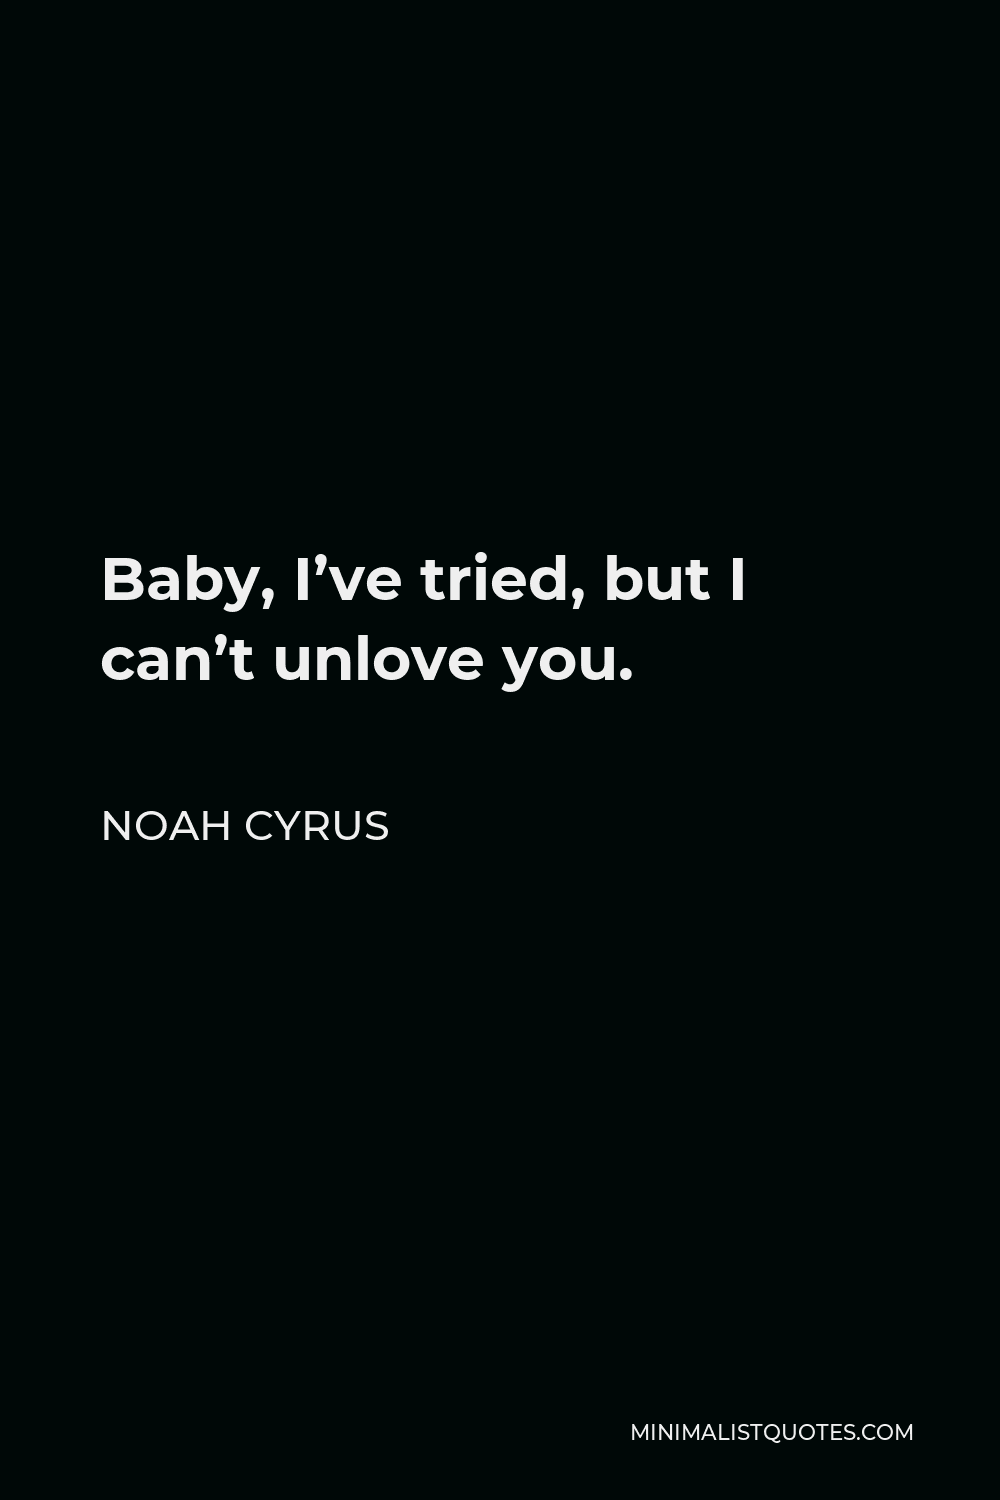 Noah Cyrus Quote - Baby, I’ve tried, but I can’t unlove you.